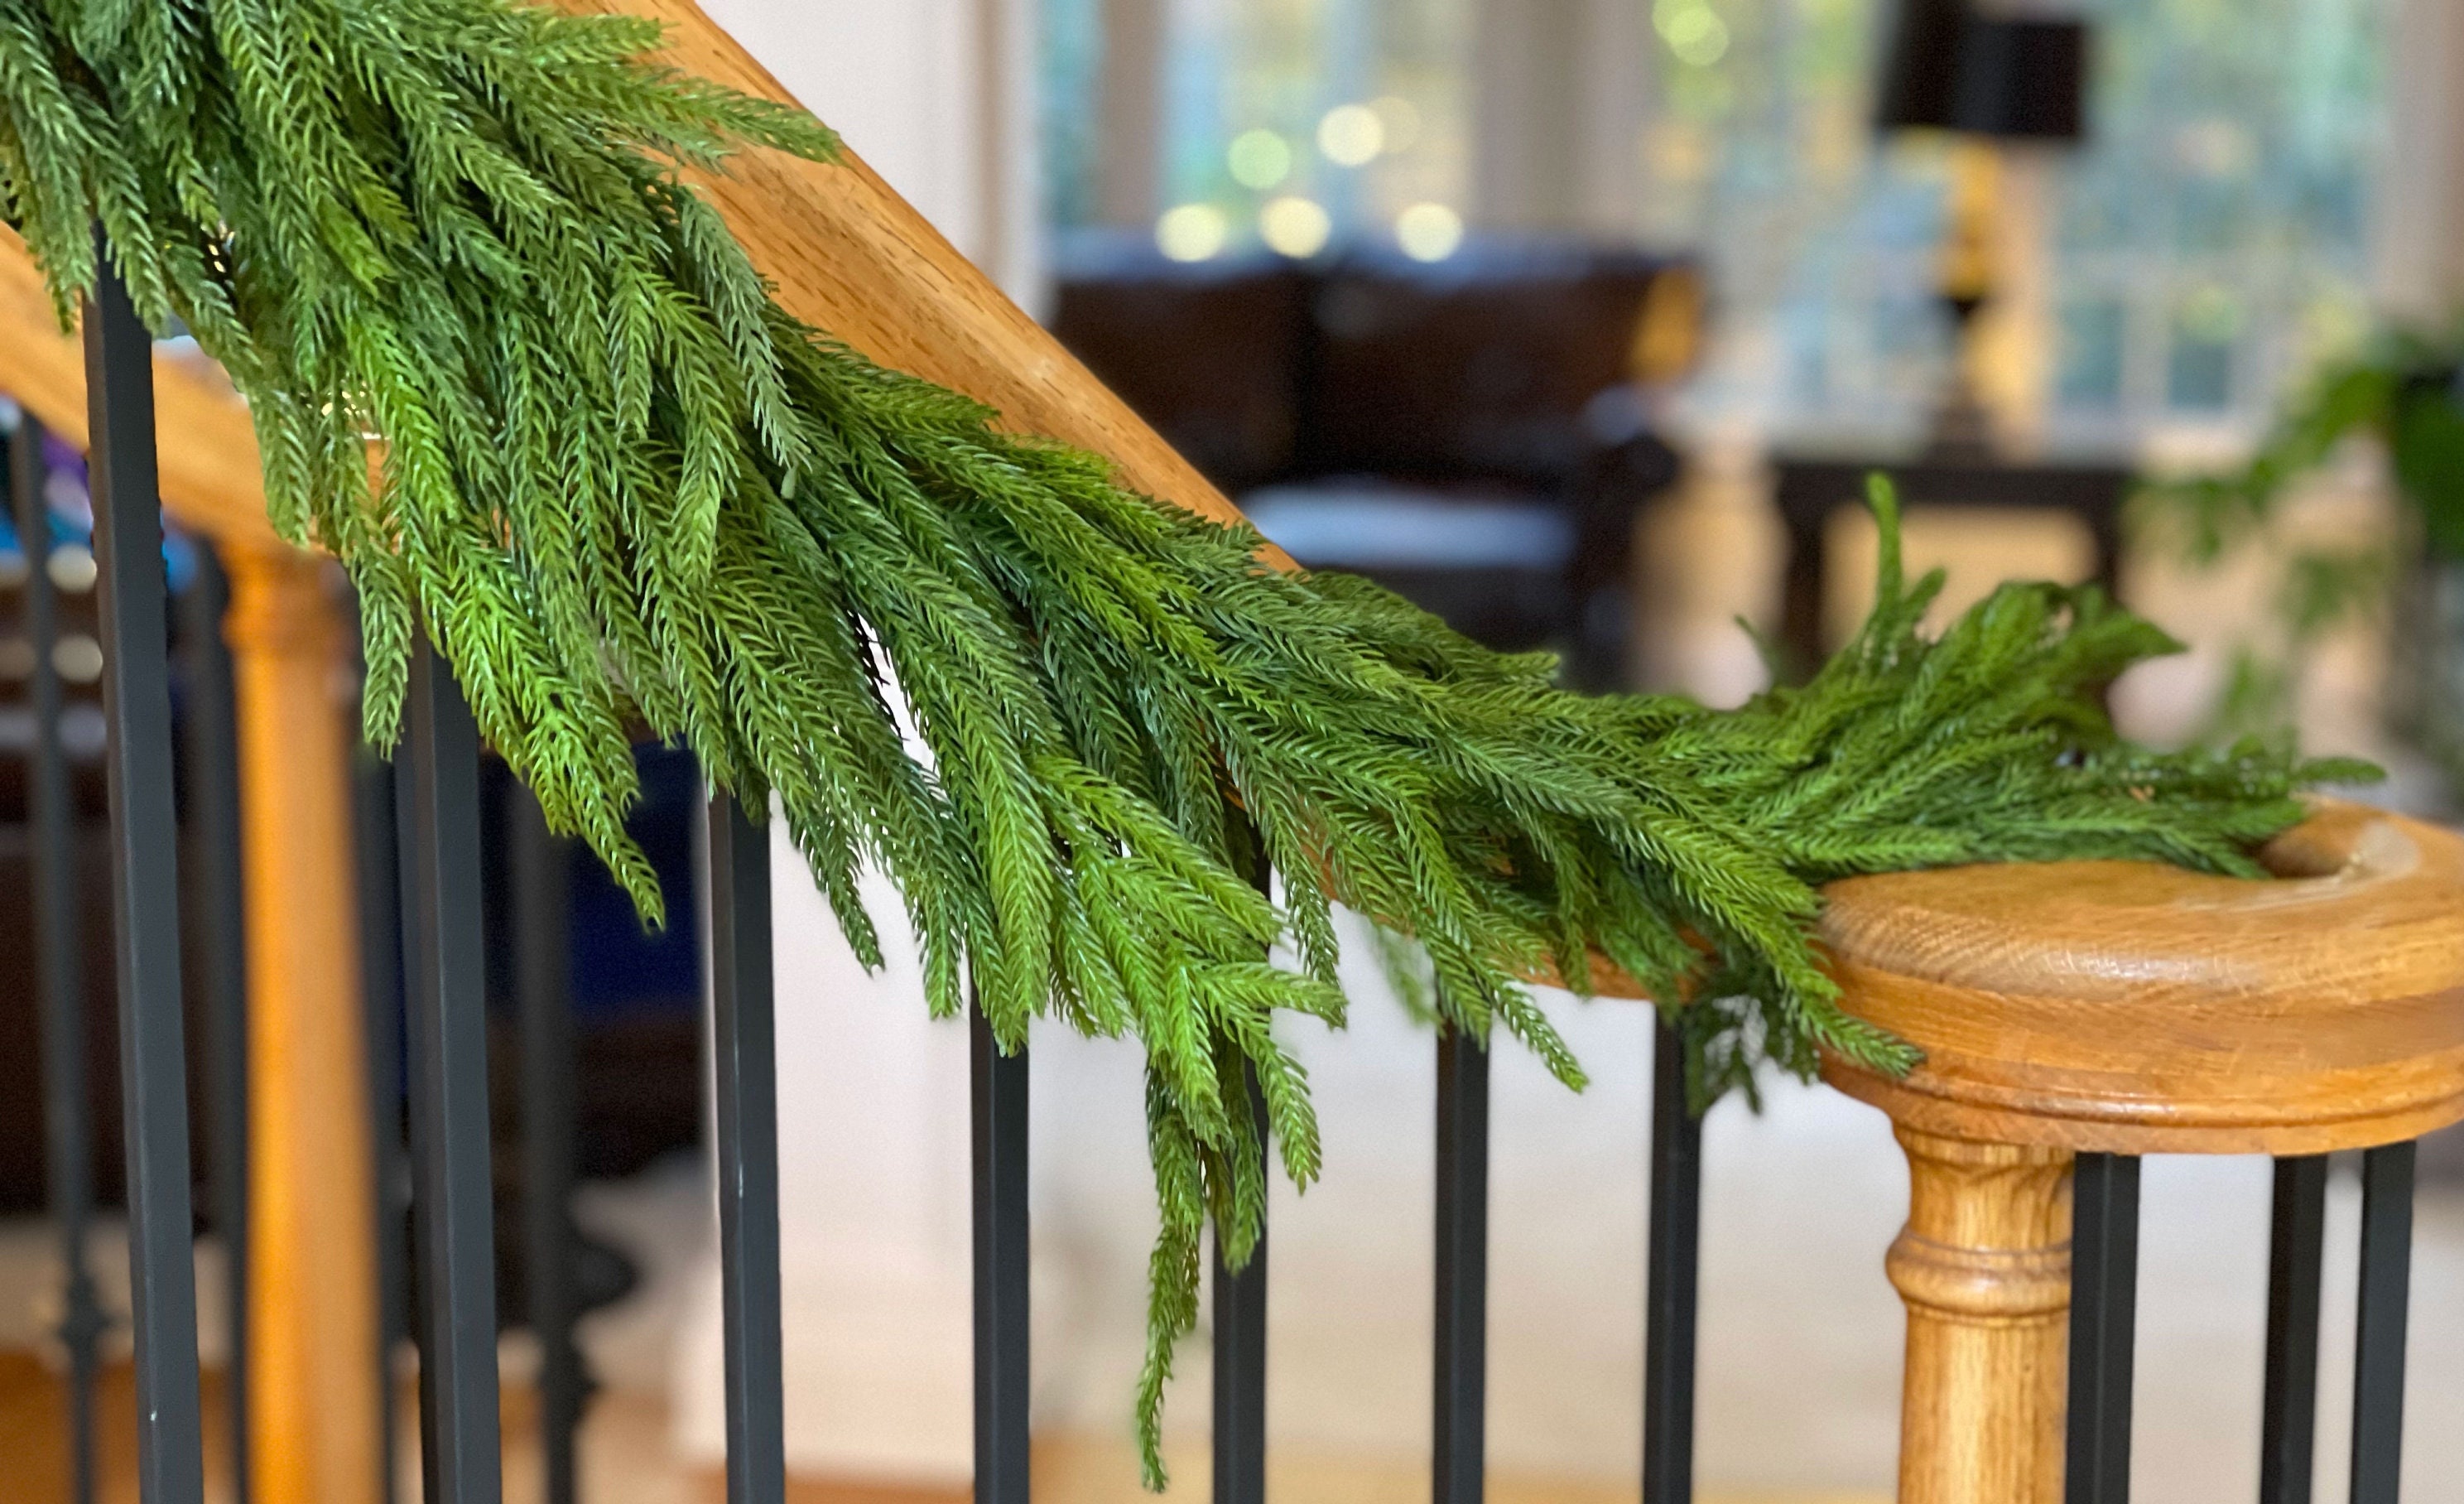 Norfolk Pine Stem Real Touch Green Faux Artificial Pine Spray Christmas  Greenery Winter Holiday Artificial Evergreen Cedar 